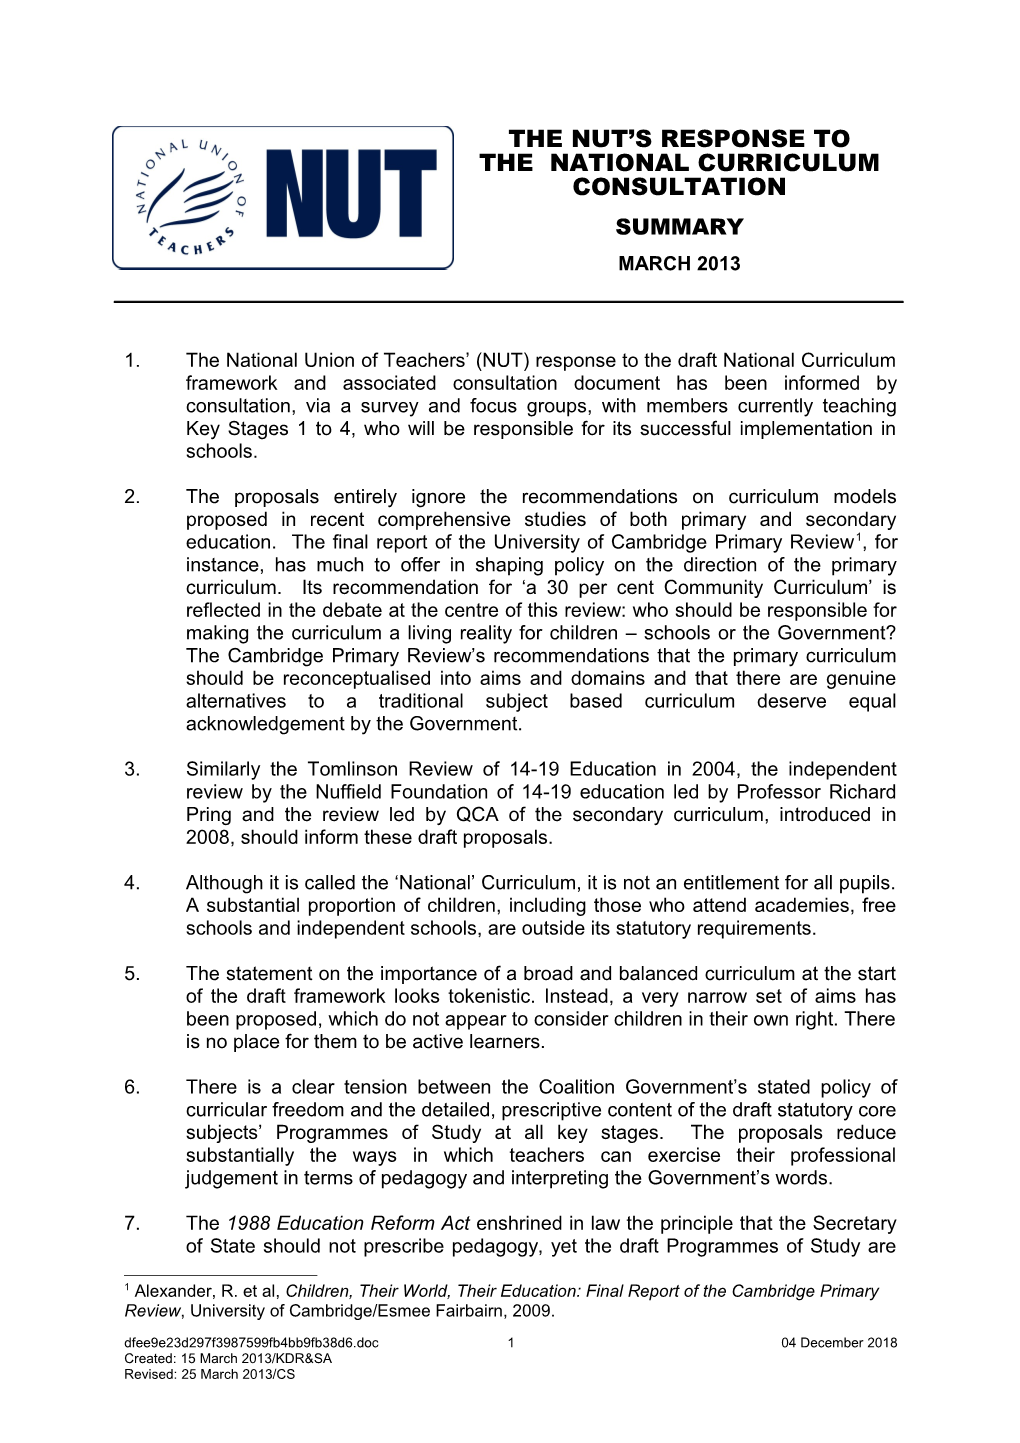 The National Union of Teachers (NUT) Response to the Draft National Curriculum Framework